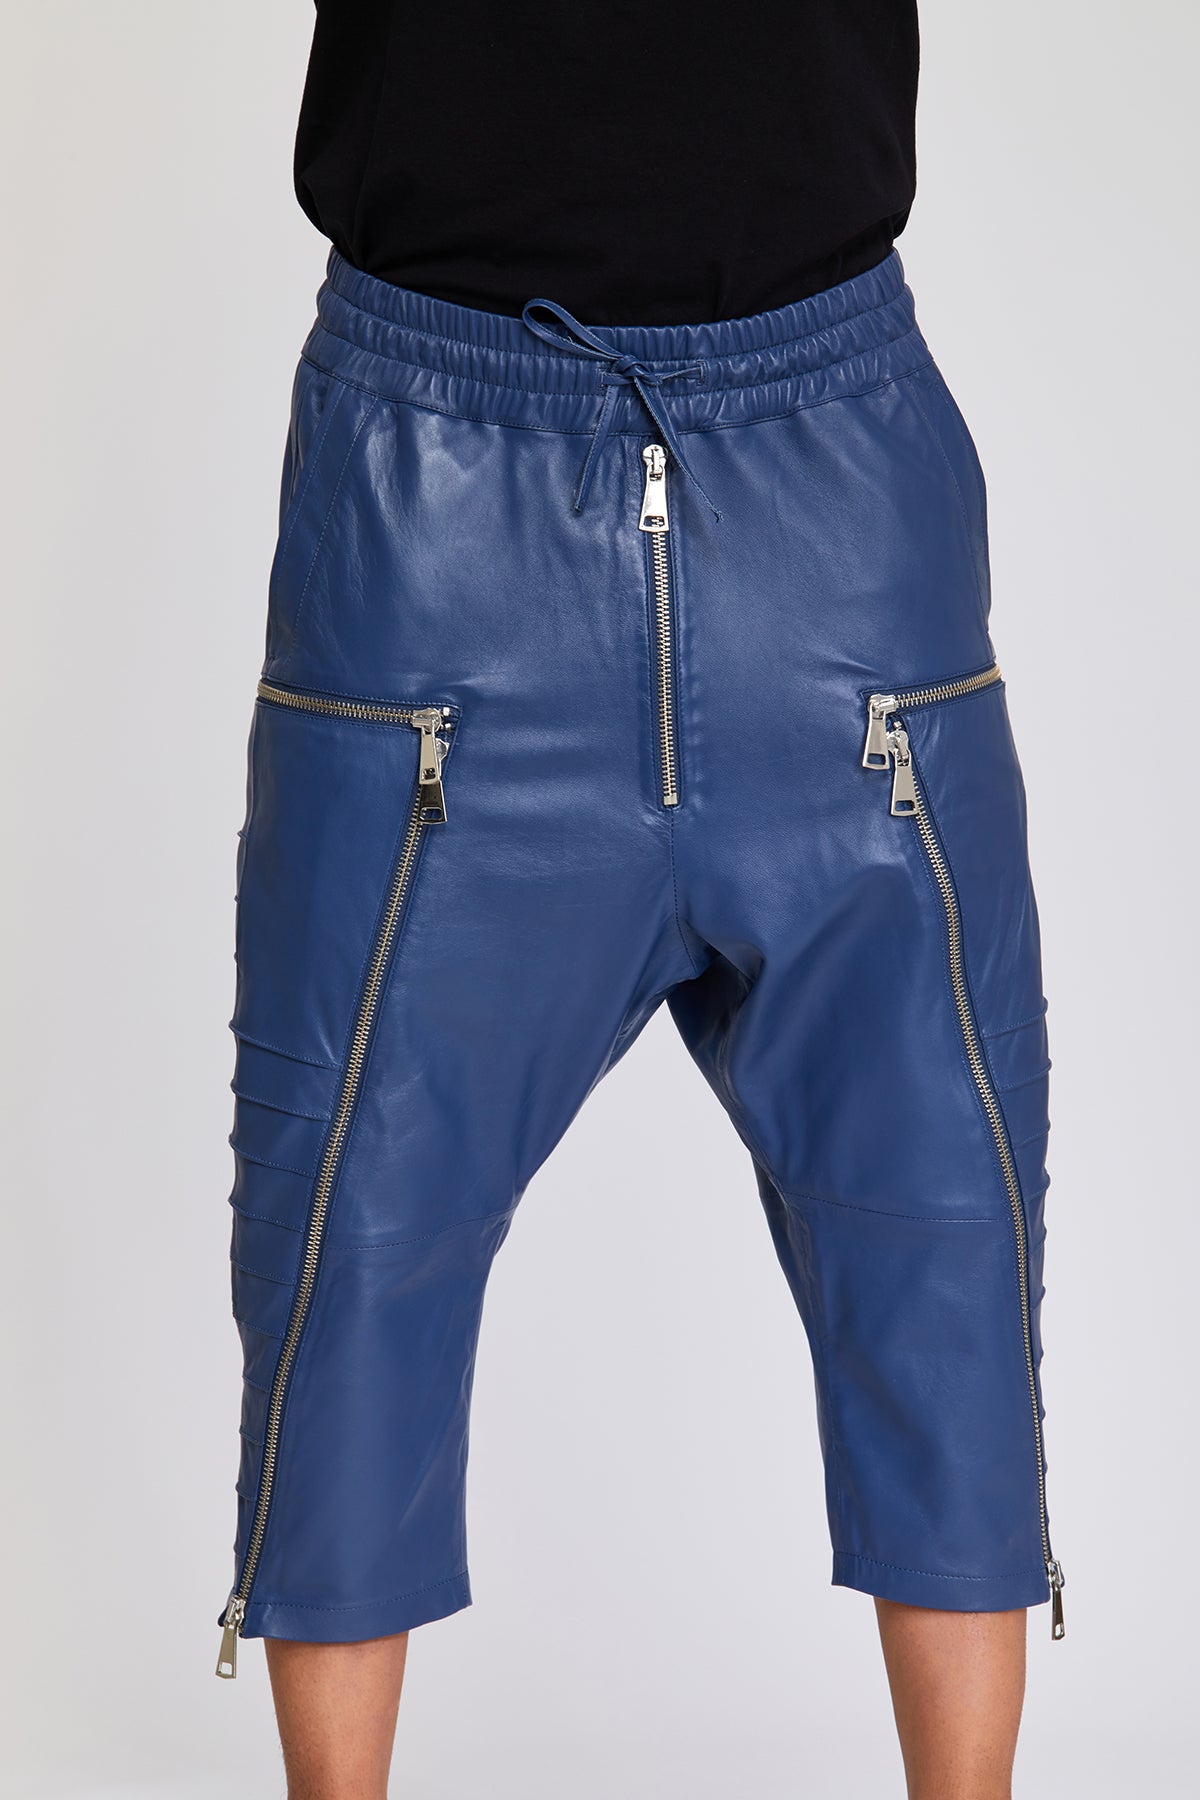 Suvi NYC Men's capri leather pants. Real Turkish leather. Lambskin. Soft. luxurious, high-end pants